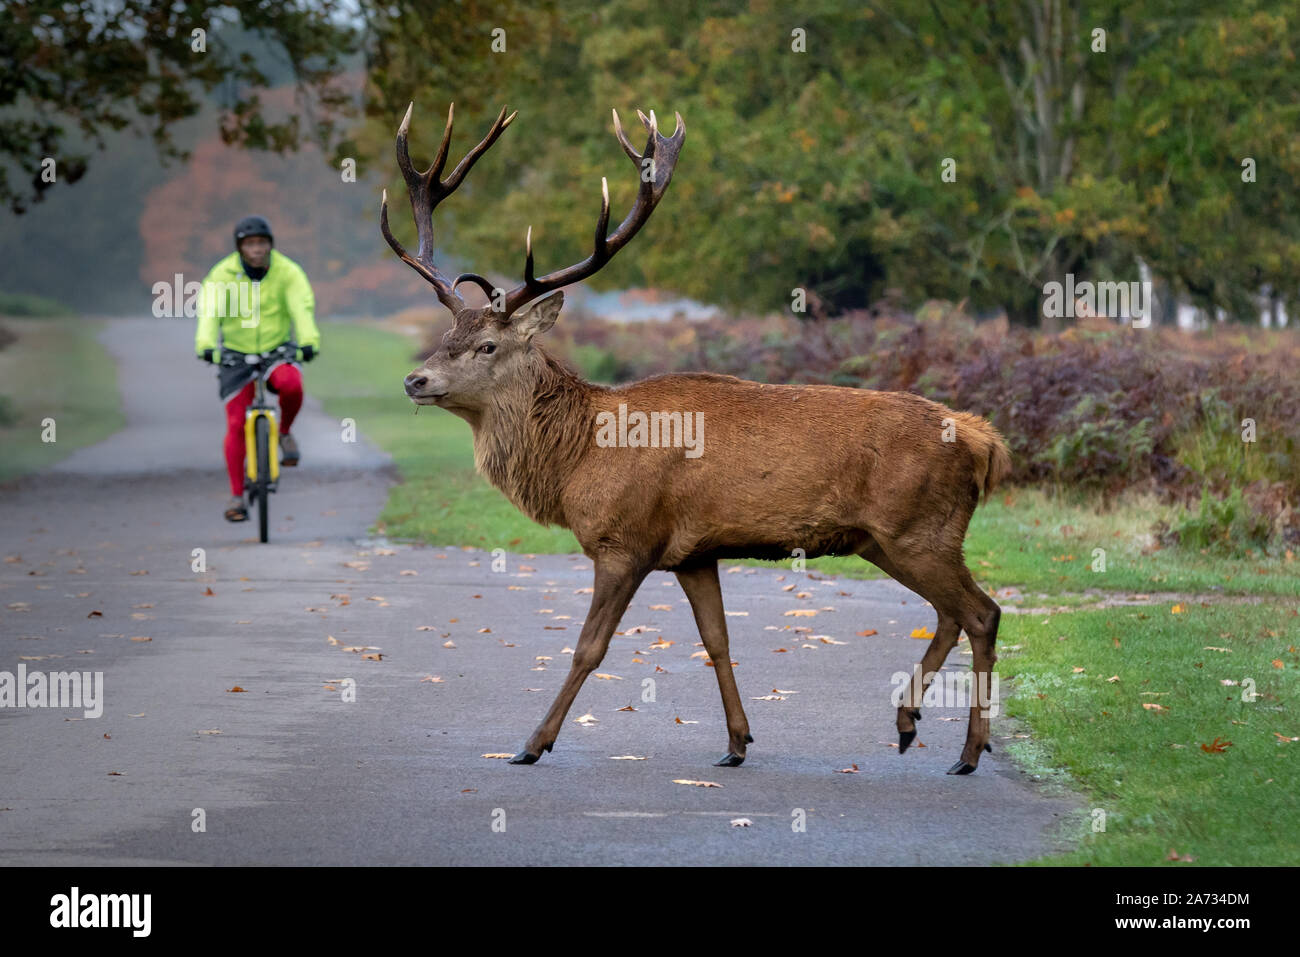 London, UK. 27th Oct 2019. Early morning deer wander through Richmond Park, where over 600 deer roam freely. Credit: Guy Corbishley/Alamy Live News Stock Photo